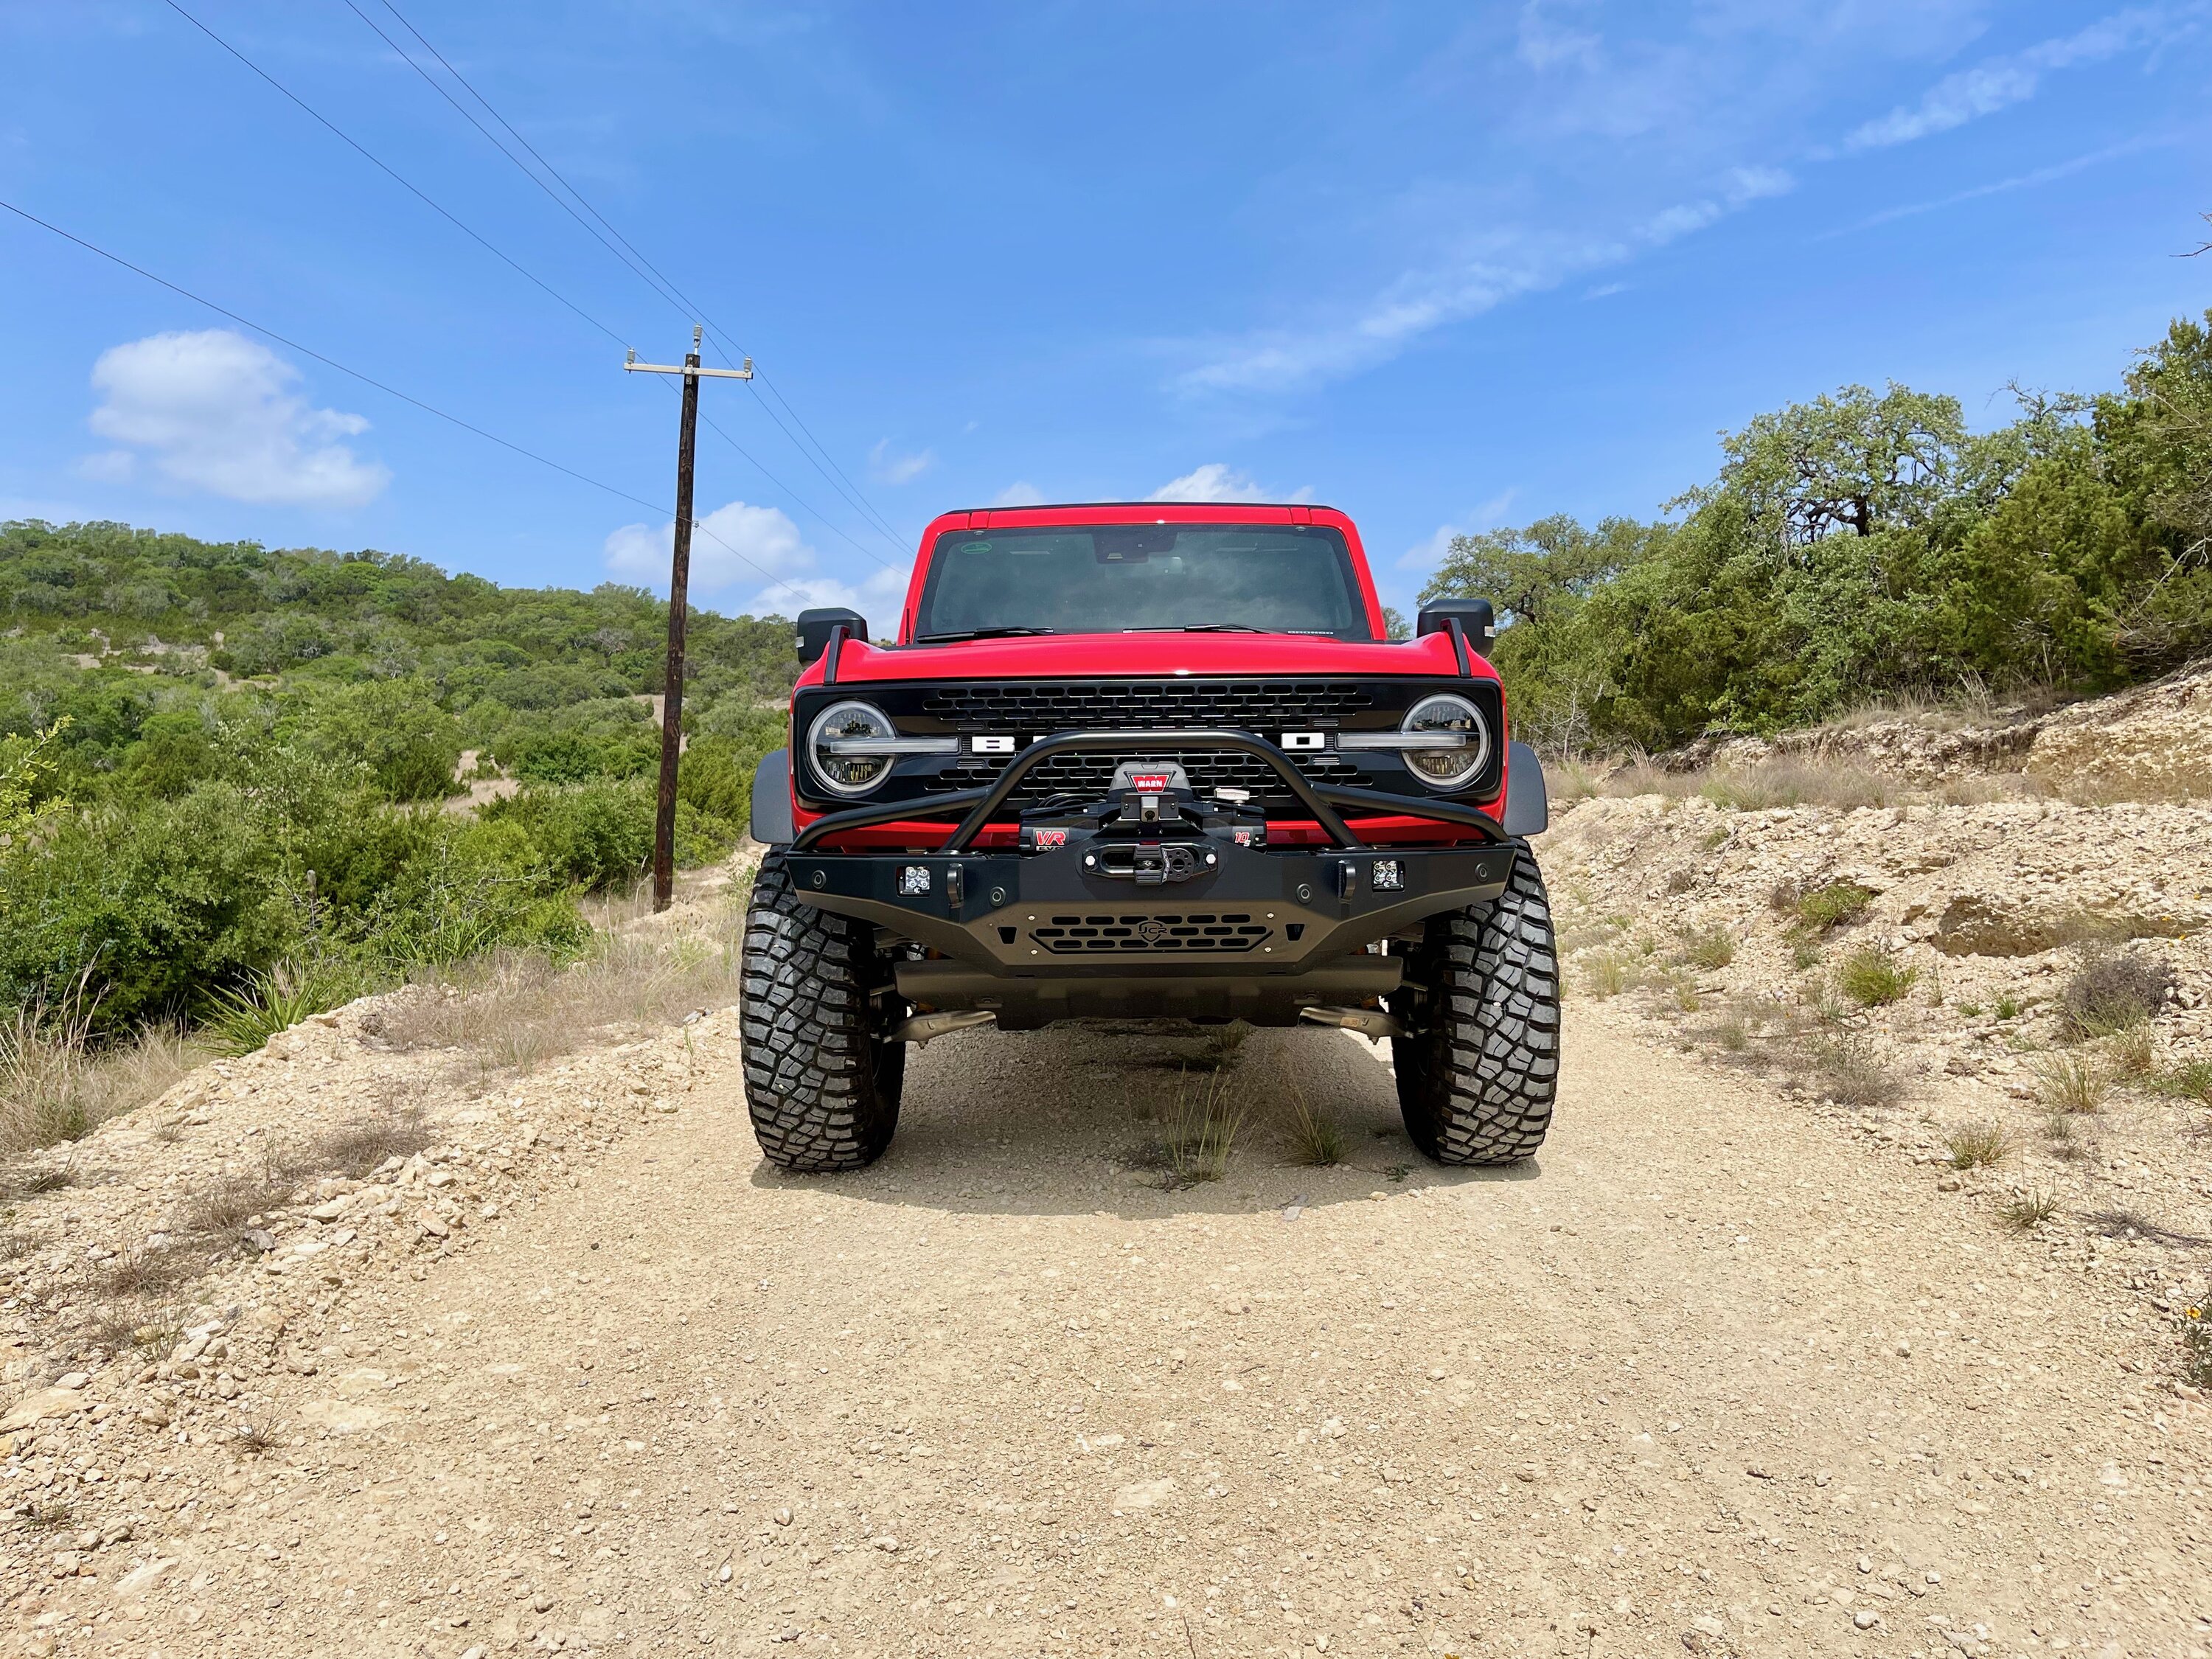 Ford Bronco LSM7581 Race Red Bronco Build IMG_7976